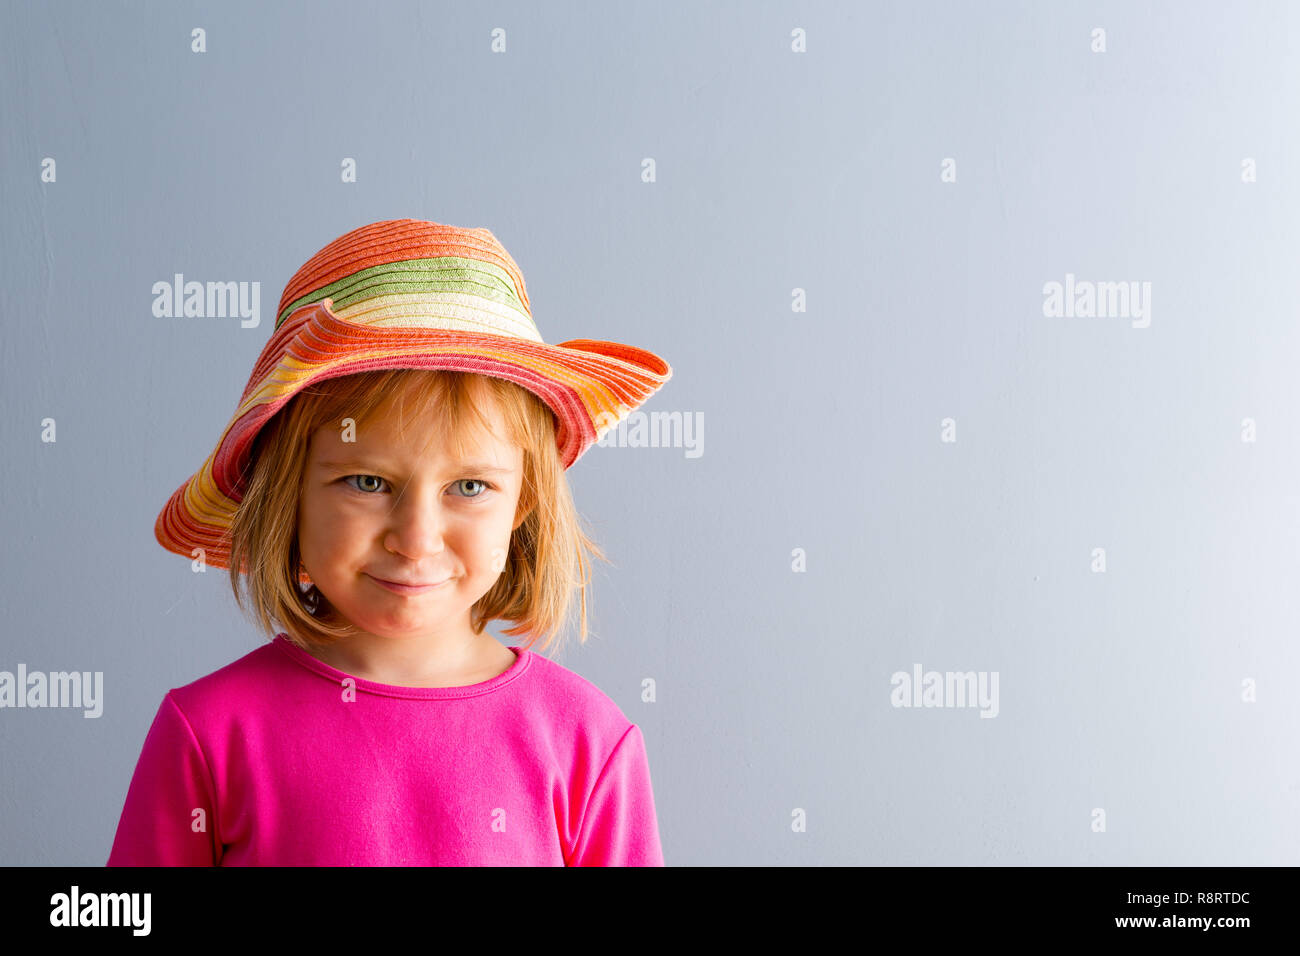 Young blond girl in vivid pink dress and colorful straw hat. Front bust portrait against plain grey background with copy space Stock Photo